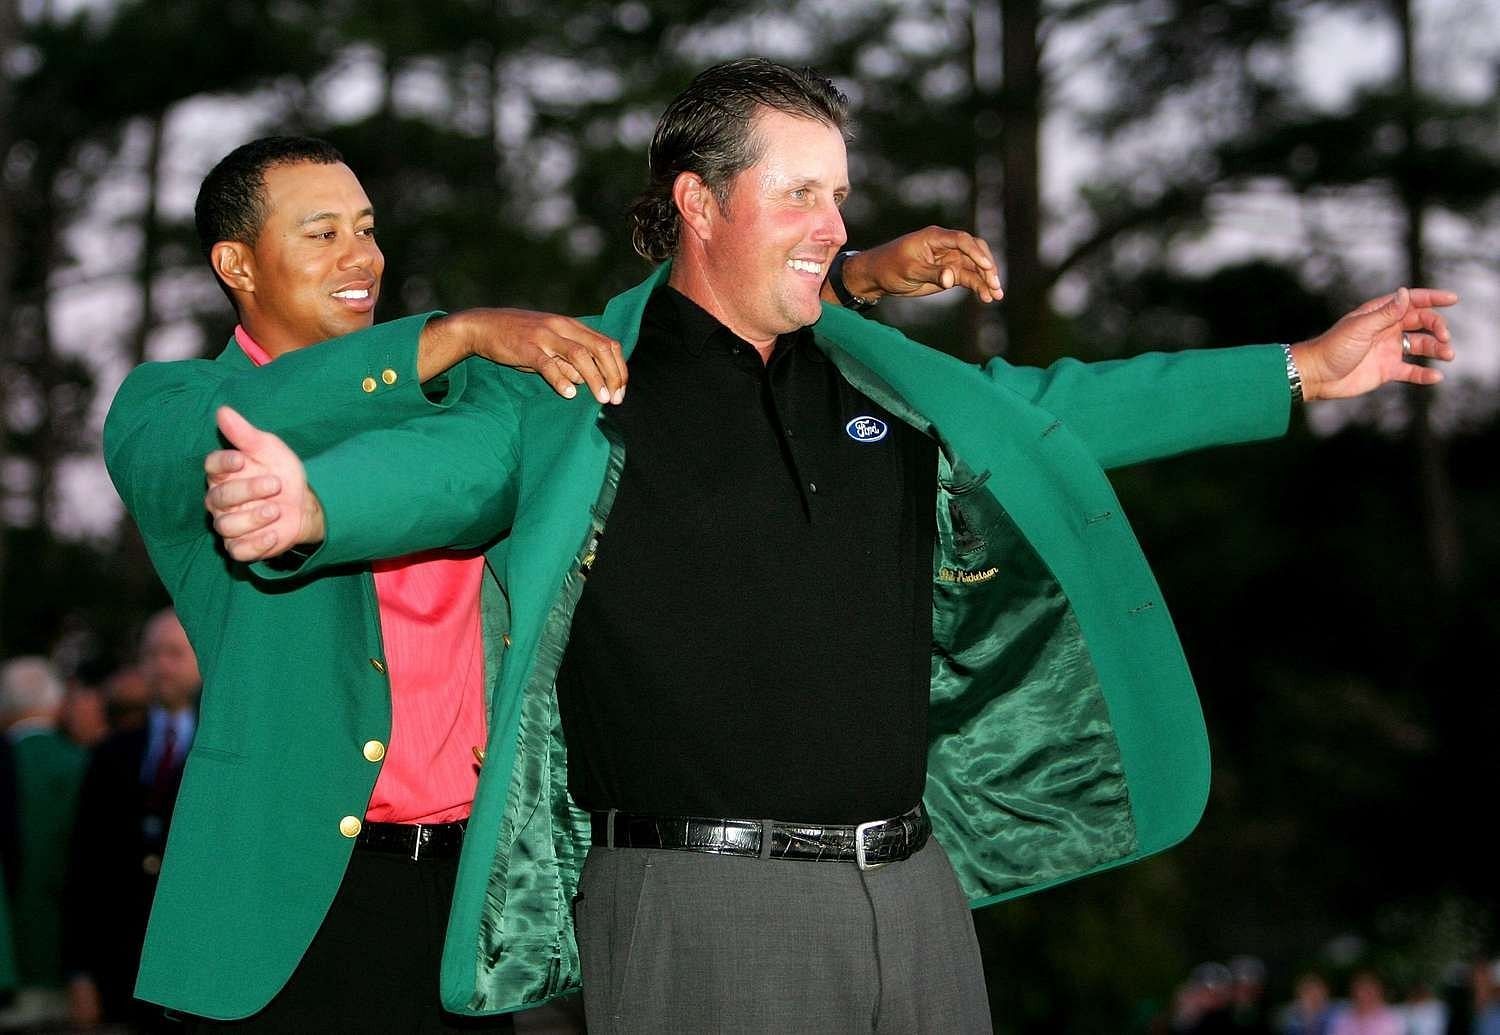 Tiger Woods helping Phil Mickelson wear his green jacket after his 2006 Masters win